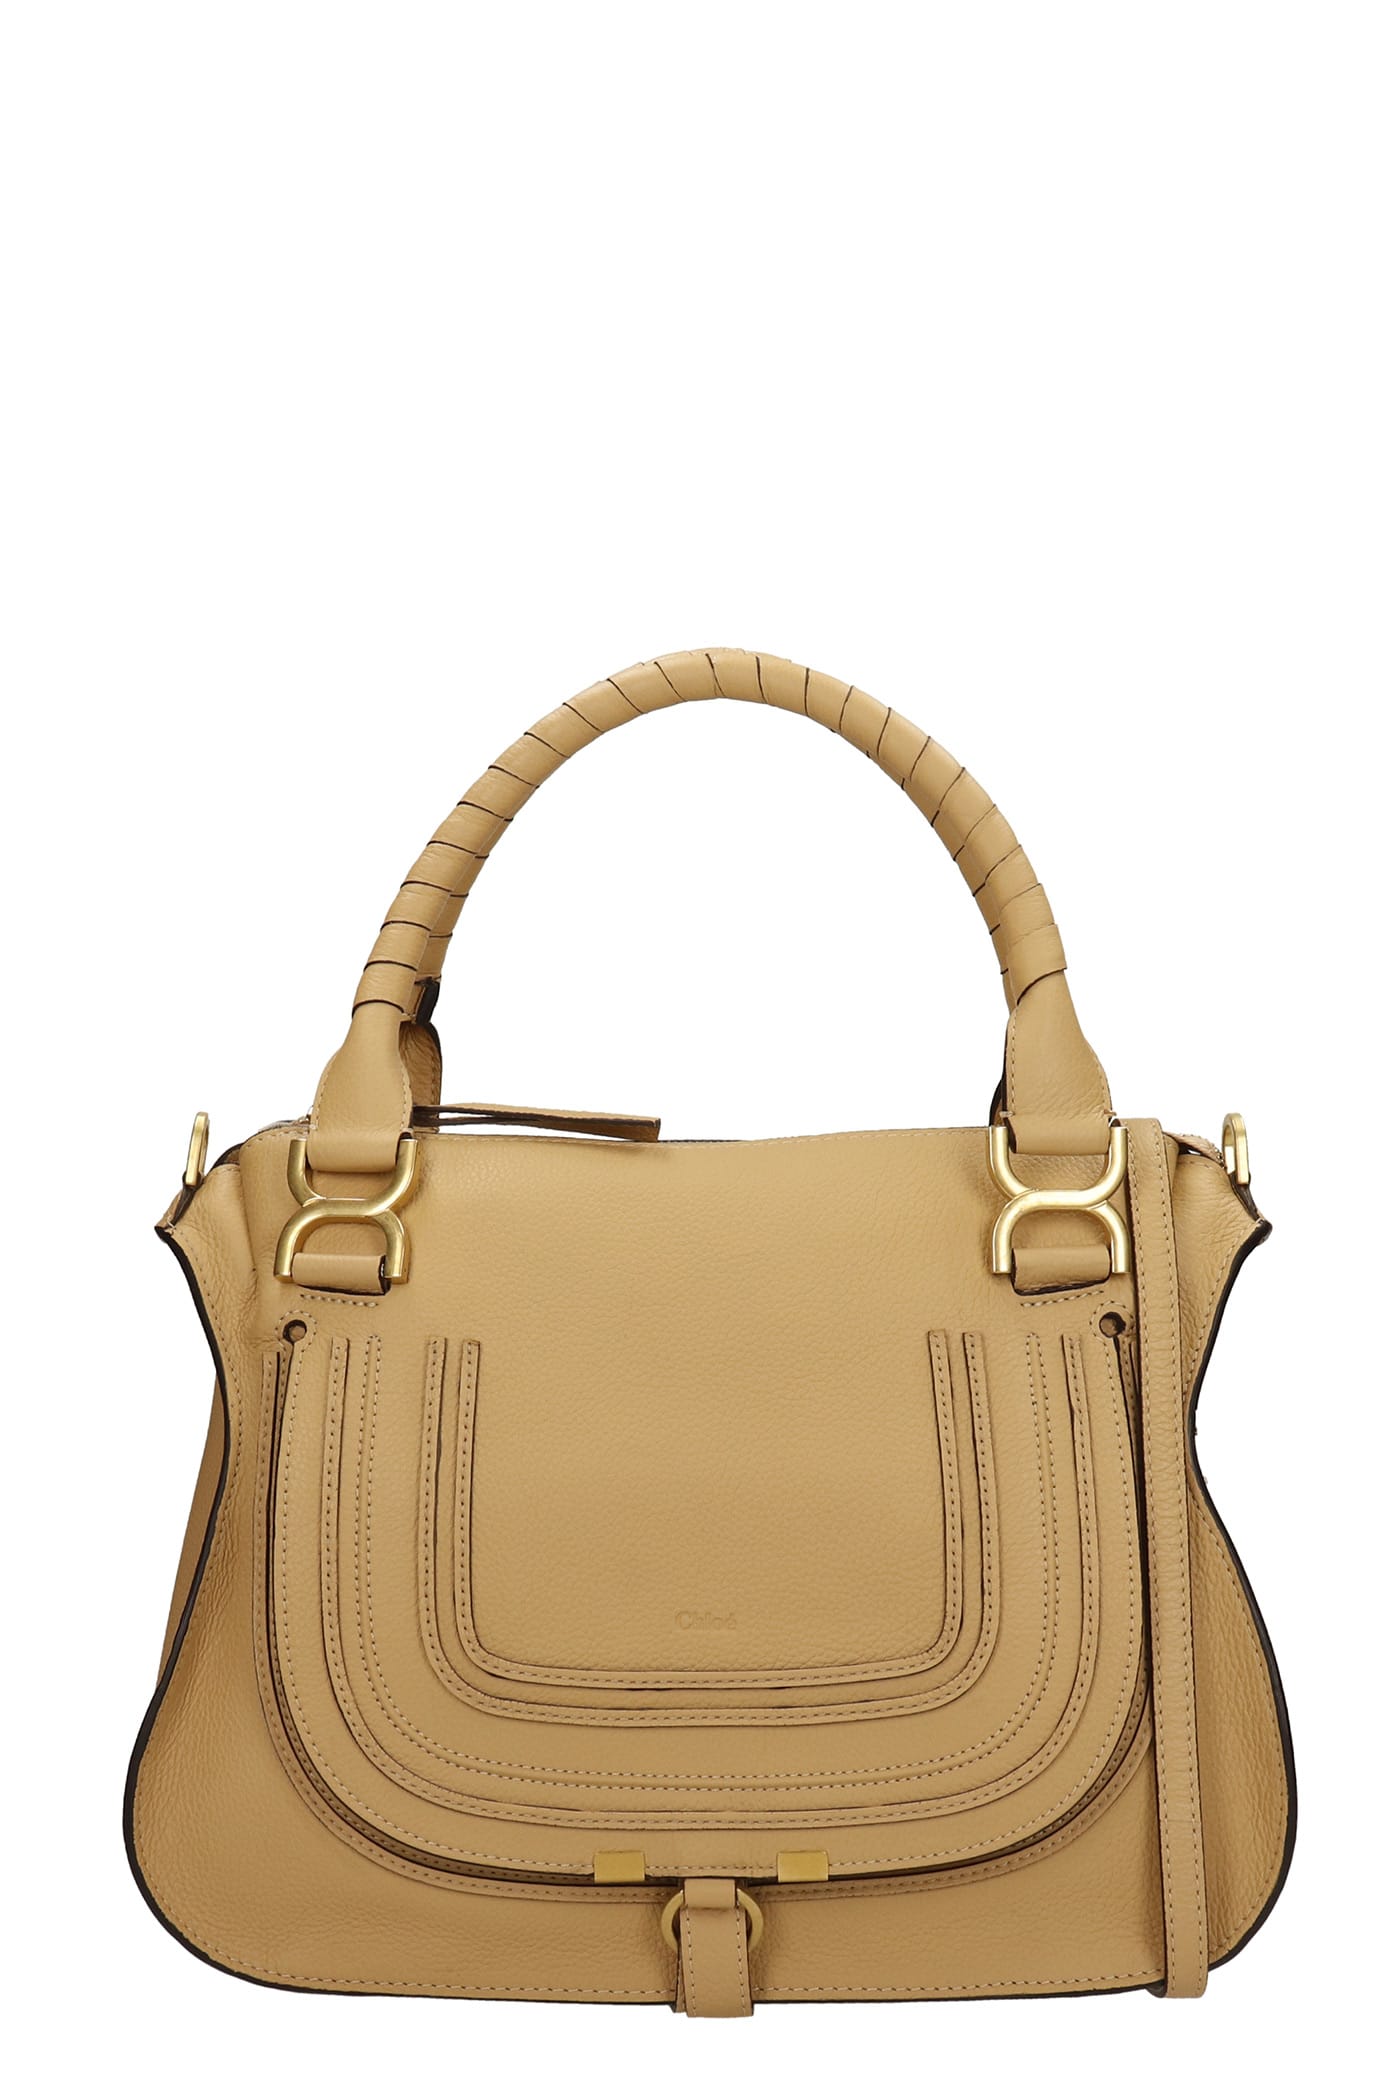 Chloé Marcie Hand Bag In Leather Color Leather